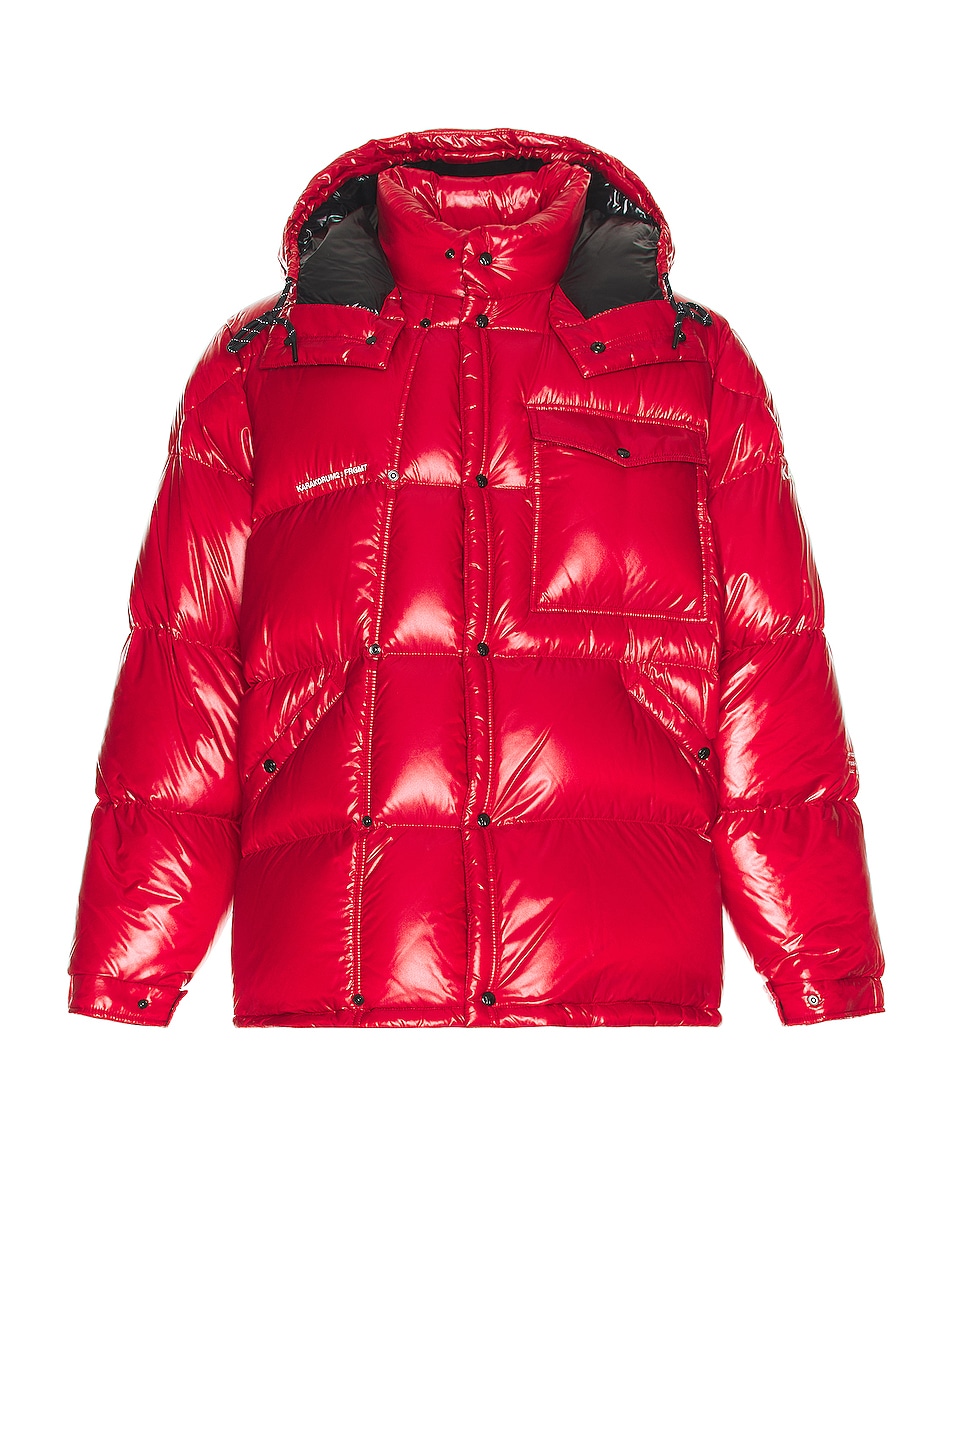 Image 1 of Moncler Genius x Fragment Athnemium Jacket in Red